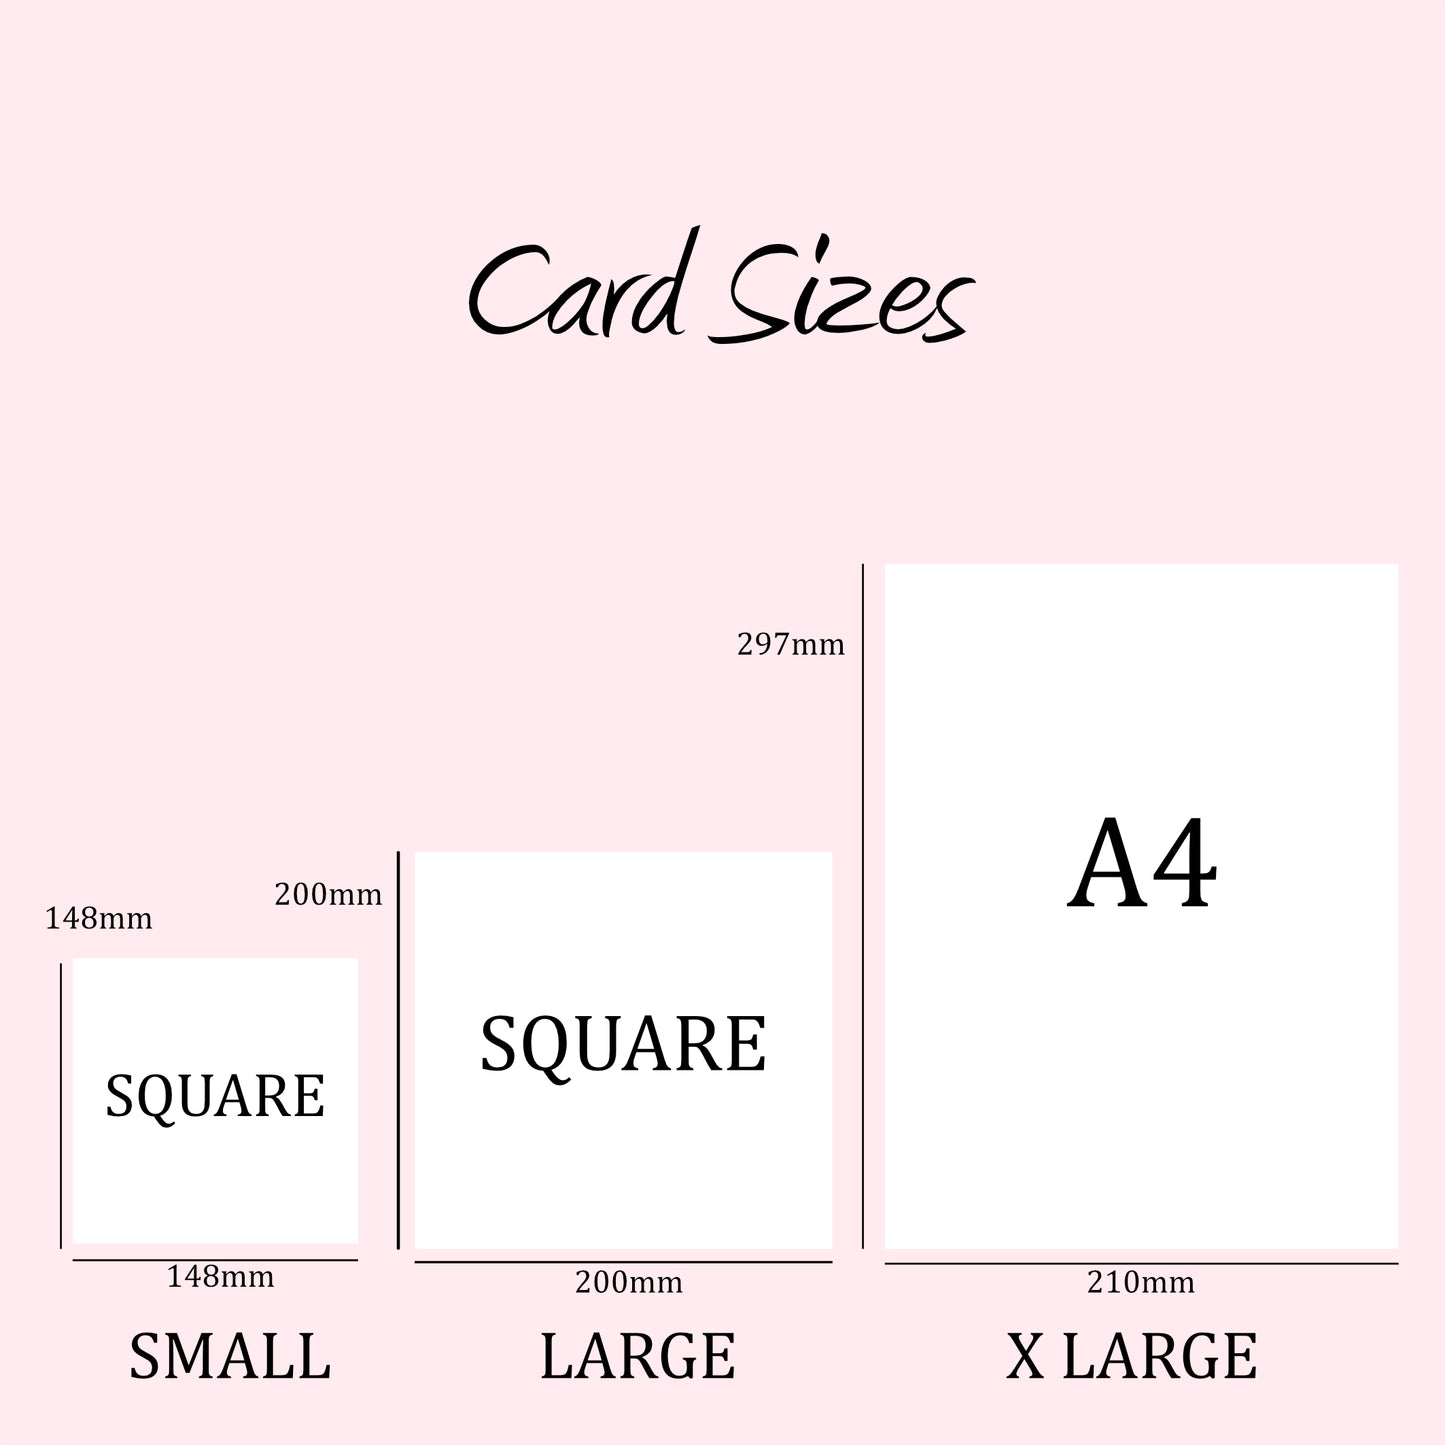 a card size guide for square and square sizes